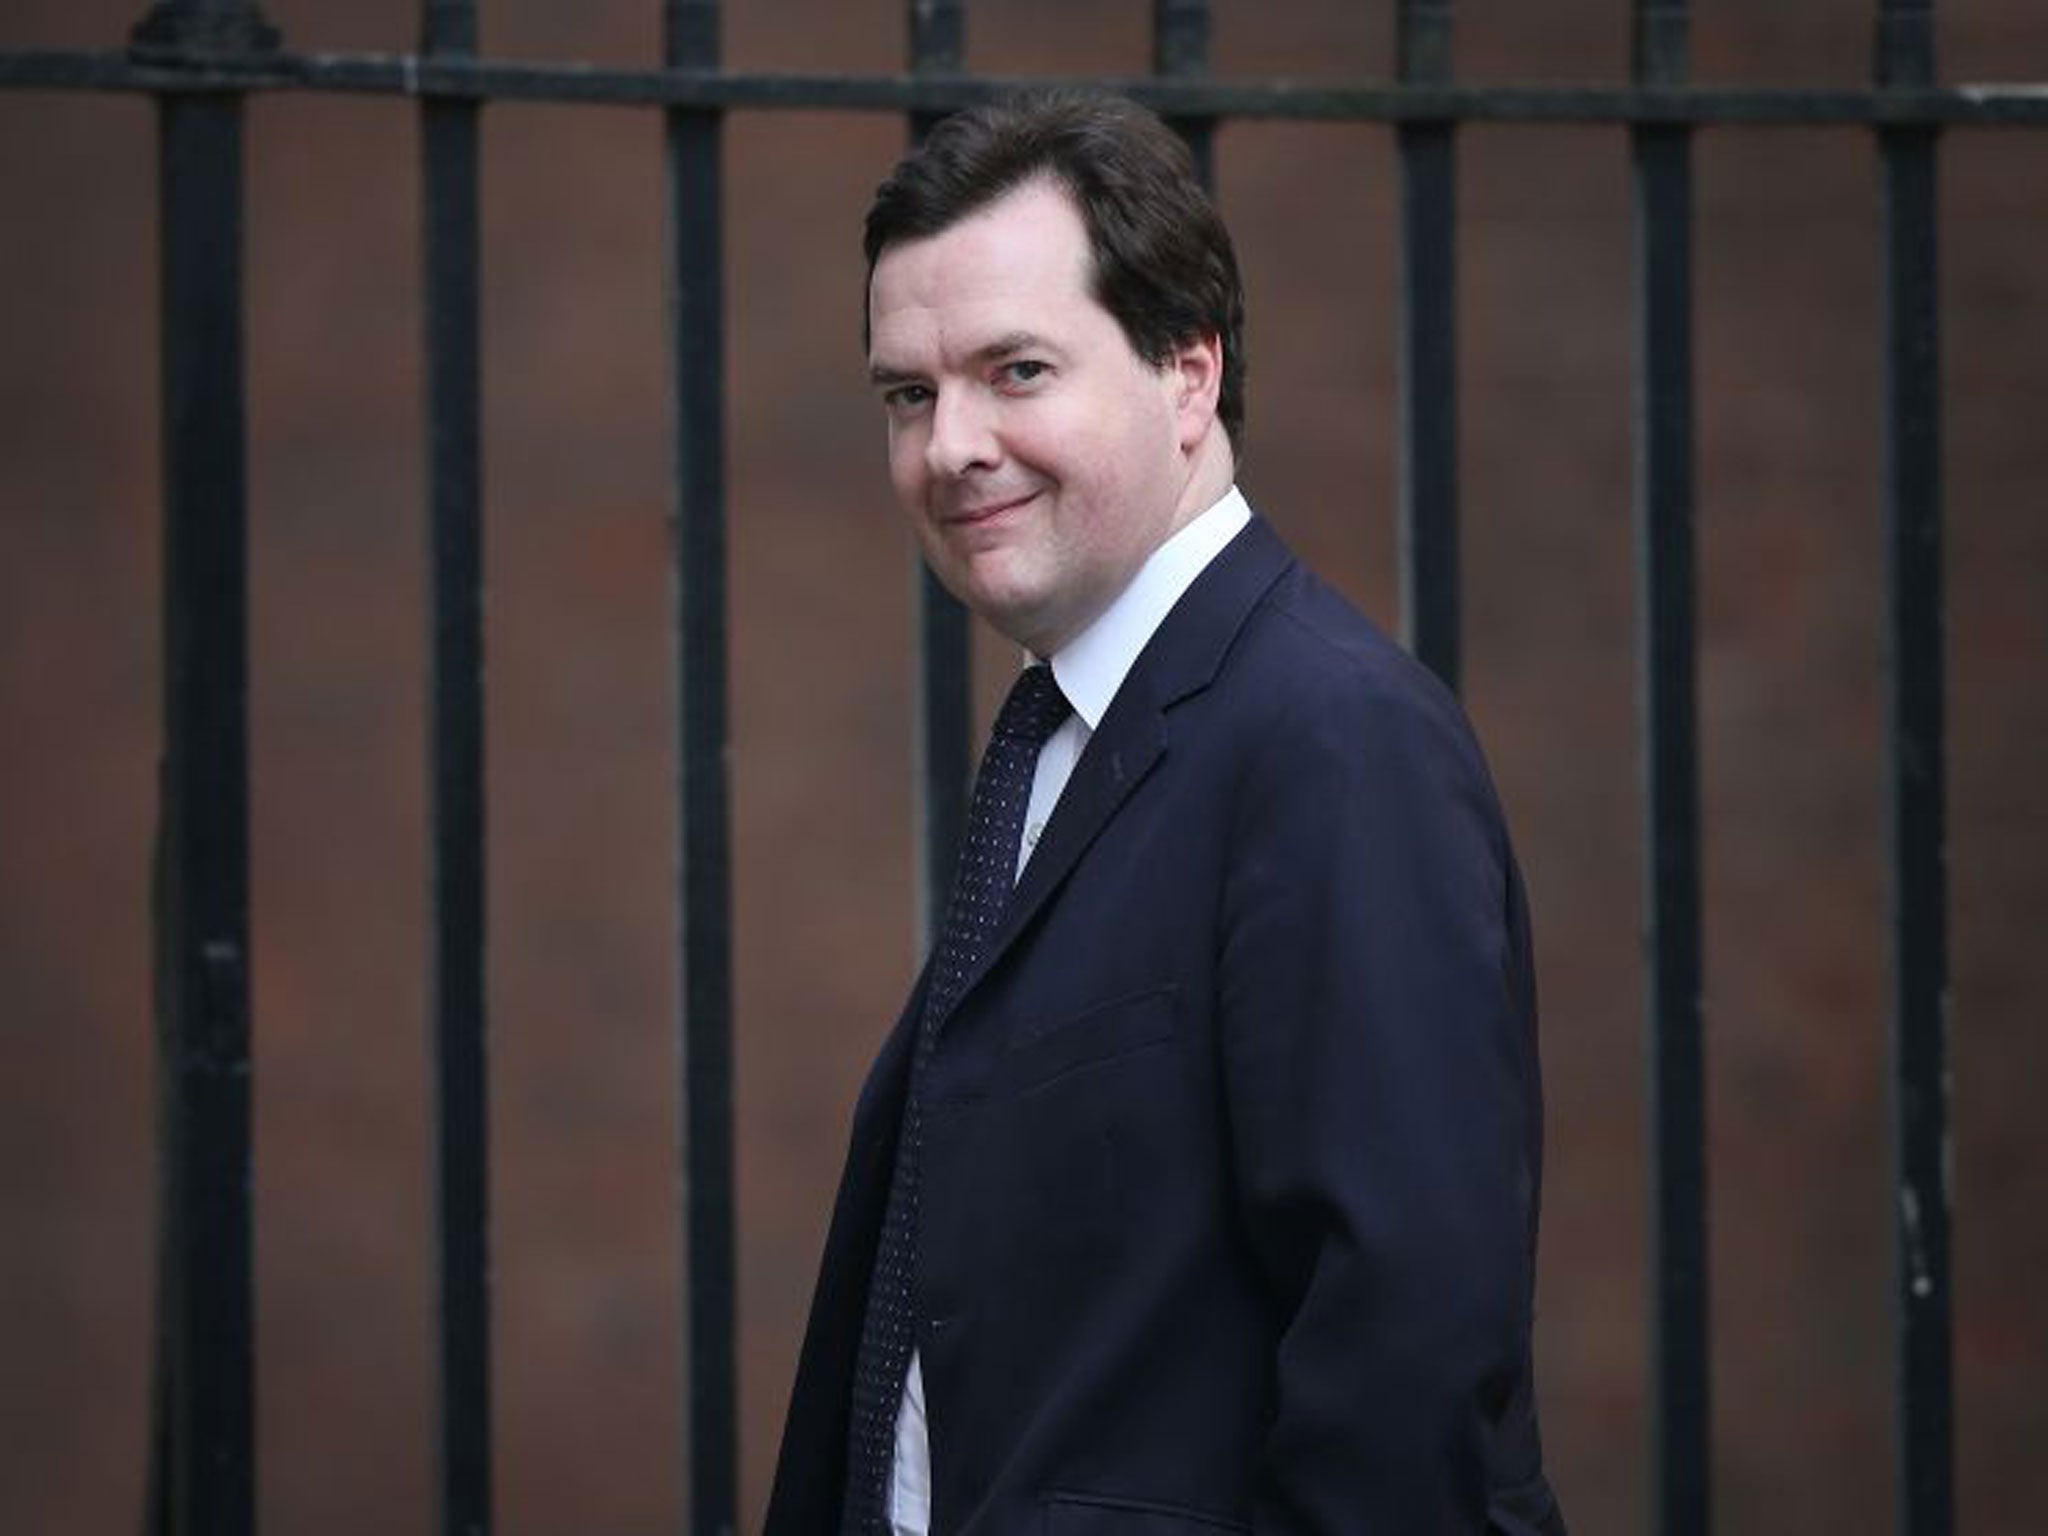 George Osborne has been criticised for raising the personal tax allowance to £10,000 a year from next month